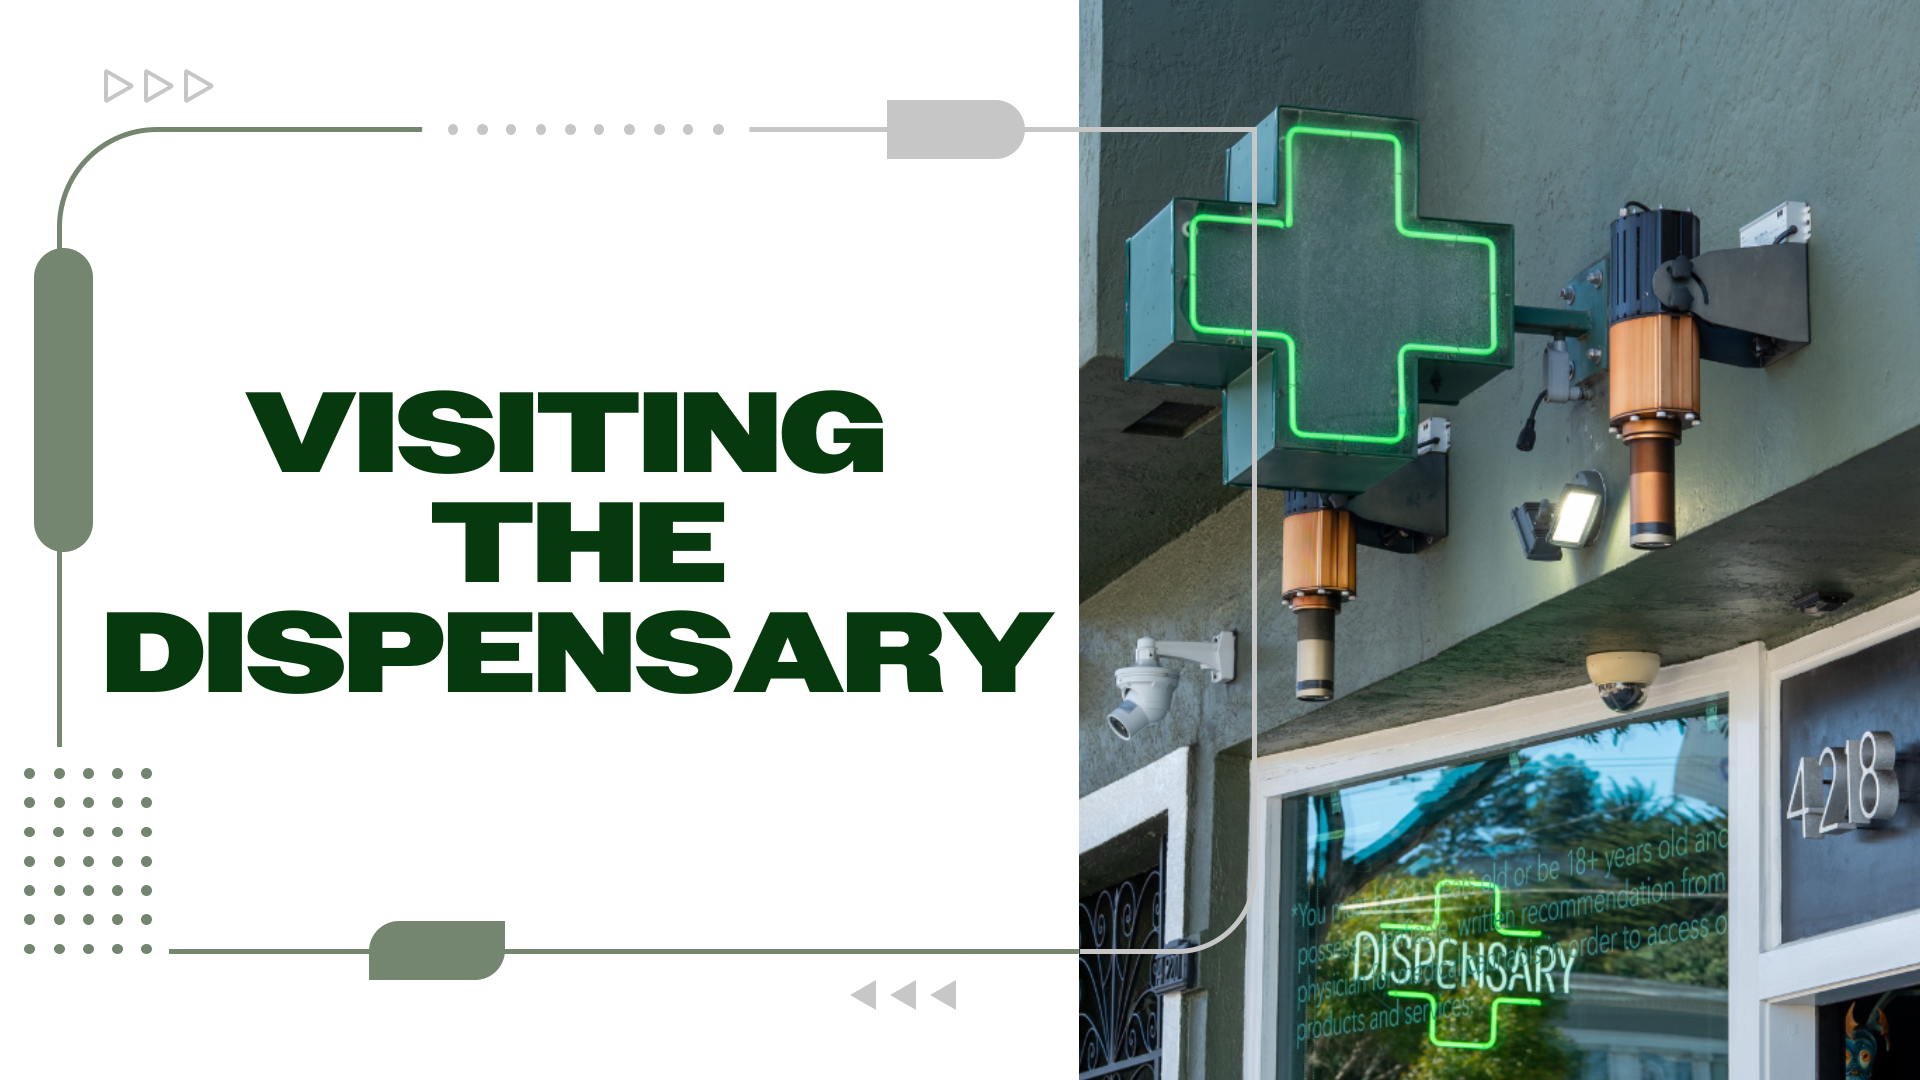 Shopping at a Dispensary for the First Time? Here Are 3 Tips